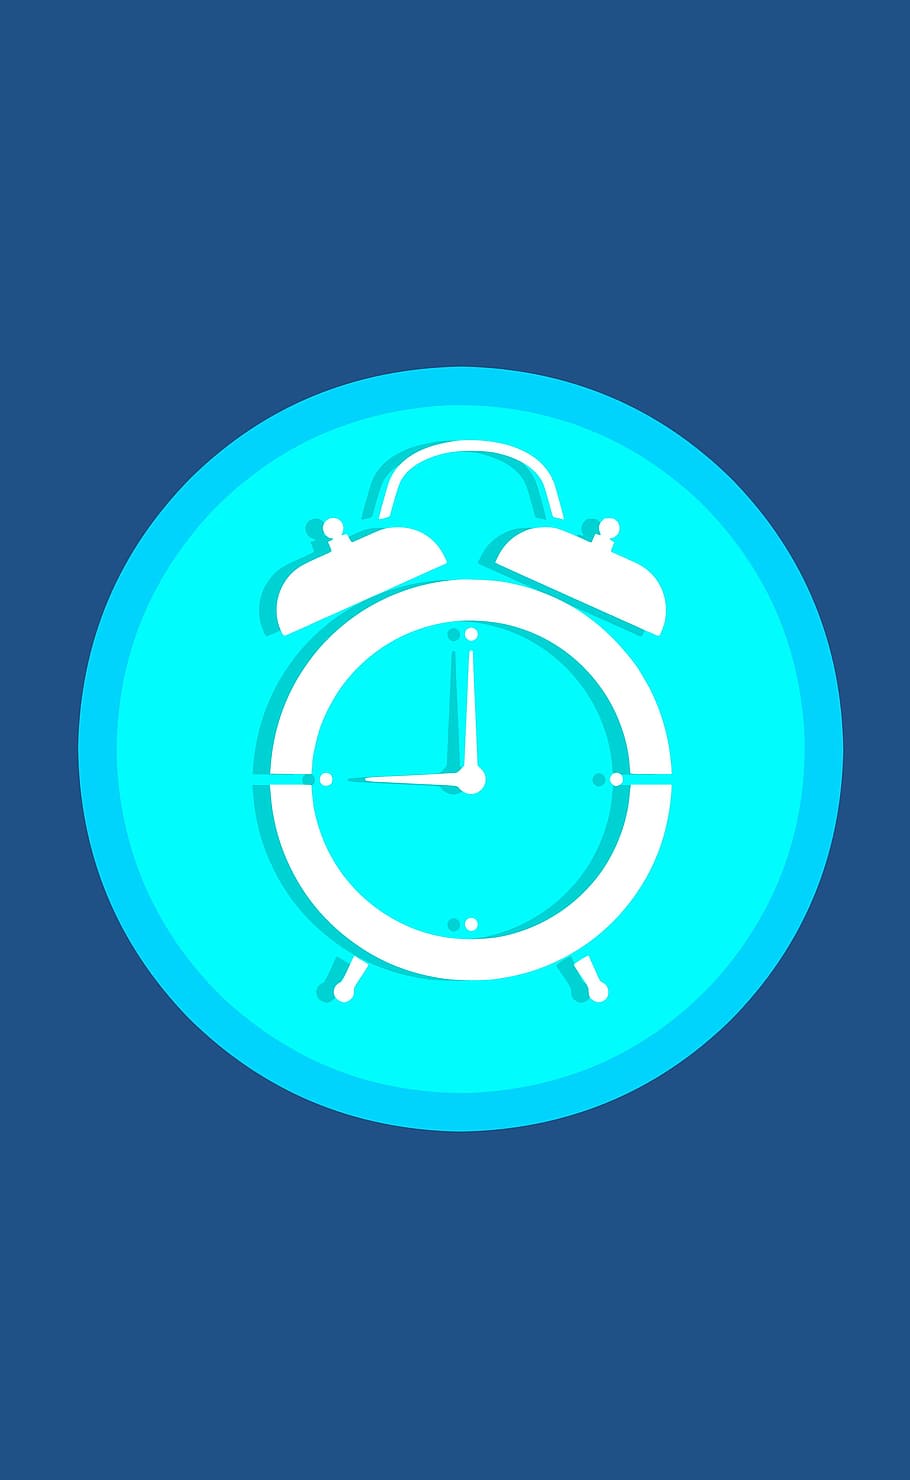 clock, time, icon, alarm, design, style, flat, business, wakeup, watch